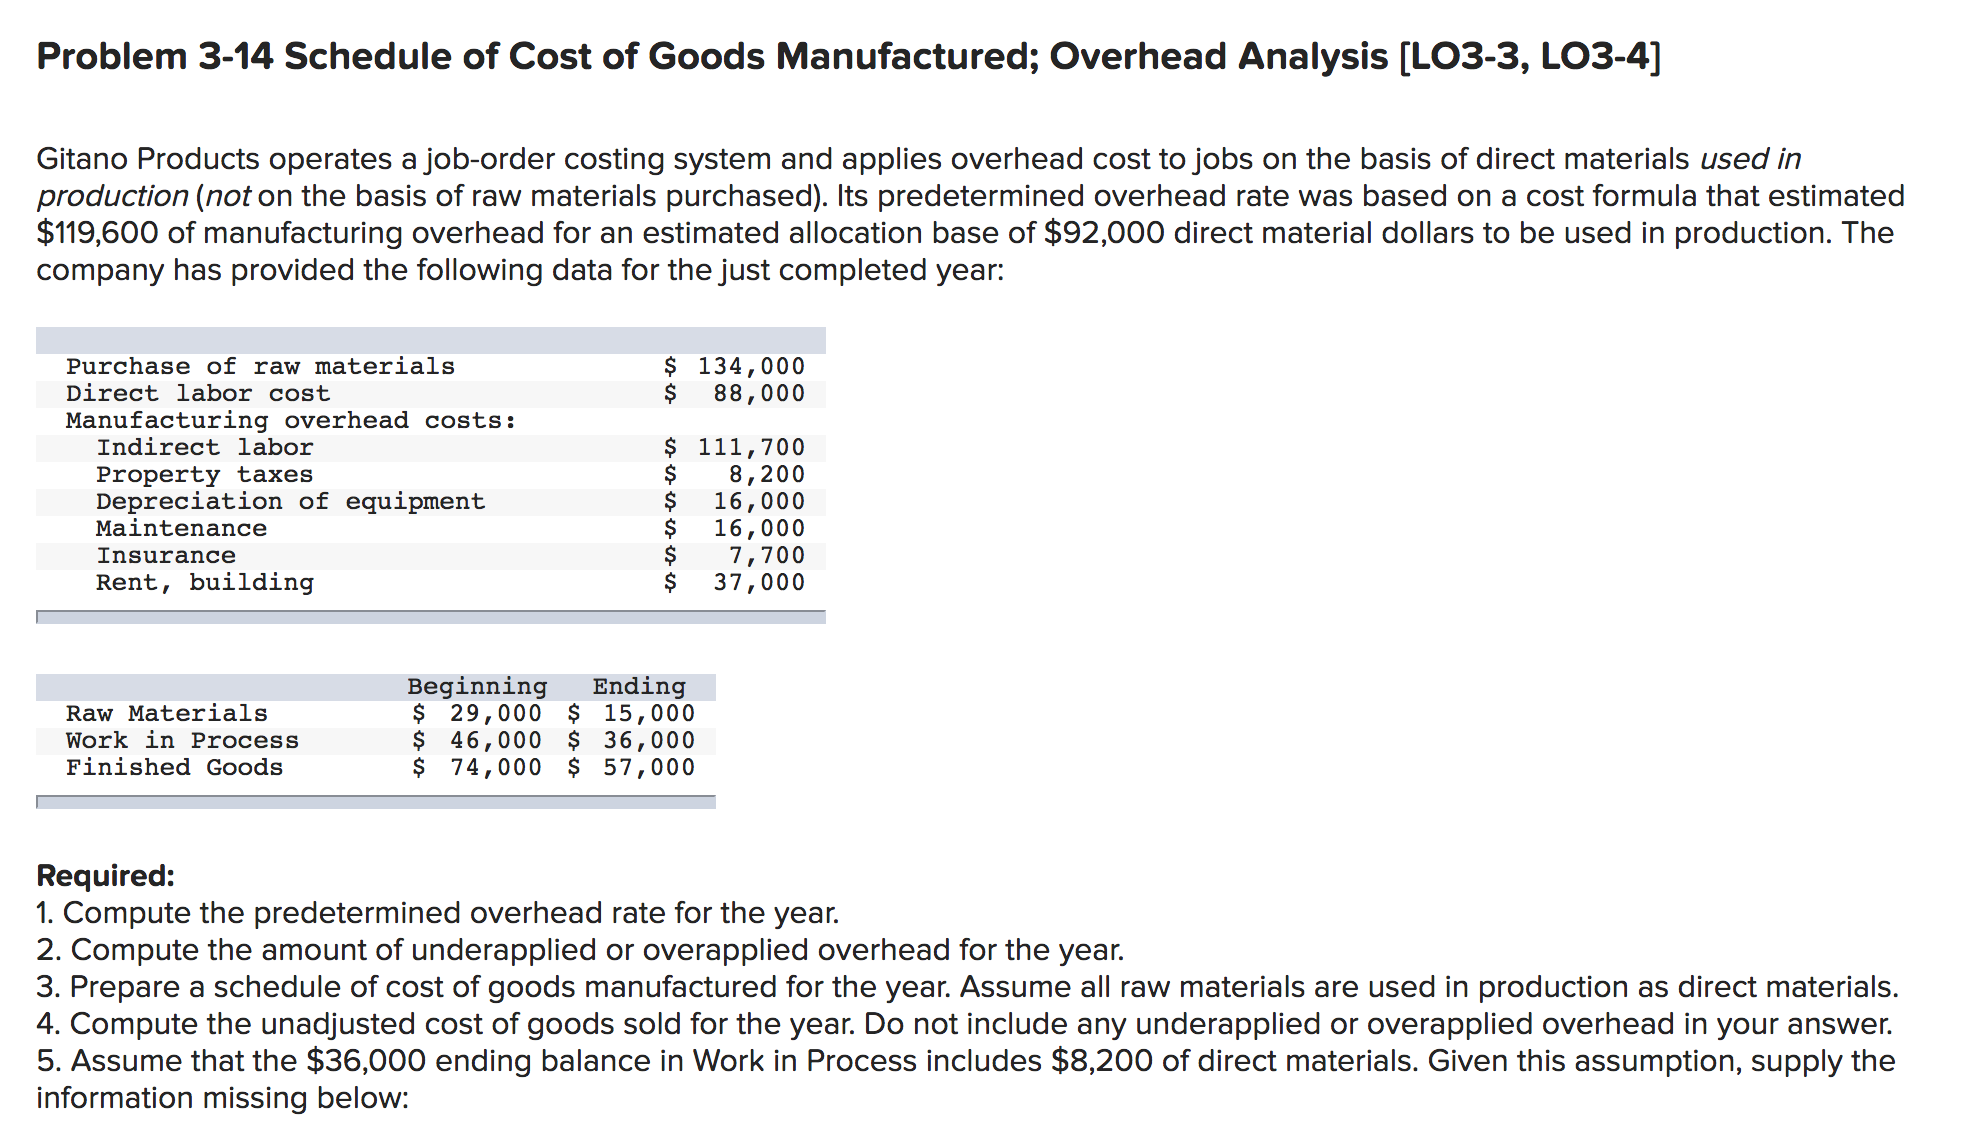 Problem 3-14 Schedule of Cost of Goods Manufactured; Overhead Analysis [LO3-3, LO3-4]
Gitano Products operates a job-order costing system and applies overhead cost to jobs on the basis of direct materials used in
production (not on the basis of raw materials purchased). Its predetermined overhead rate was based on a cost formula that estimated
$119,600 of manufacturing overhead for an estimated allocation base of $92,000 direct material dollars to be used in production. The
company has provided the following data for the just completed year:
$ 134,000
88,000
Purchase of raw materials
Direct labor cost
Manufacturing overhead costs:
Indirect labor
$ 111,700
8,200
16,000
16,000
7,700
37,000
Property taxes
Depreciation of equipment
Maintenance
Insurance
Rent, building
Beginning
$ 29,000 $ 15,000
$ 46,000
$ 74,000 $ 57,000
Ending
Raw Materials
Work in Process
Finished Goods
36,000
Required:
1. Compute the predetermined overhead rate for the year.
2. Compute the amount of underapplied or overapplied overhead for the year.
3. Prepare a schedule of cost of goods manufactured for the year. Assume all raw materials are used in production as direct materials.
4. Compute the unadjusted cost of goods sold for the year. Do not include any underapplied or overapplied overhead in your answer.
5. Assume that the $36,000 ending balance in Work in Process includes $8,200 of direct materials. Given this assumption, supply the
information missing below:
%24
